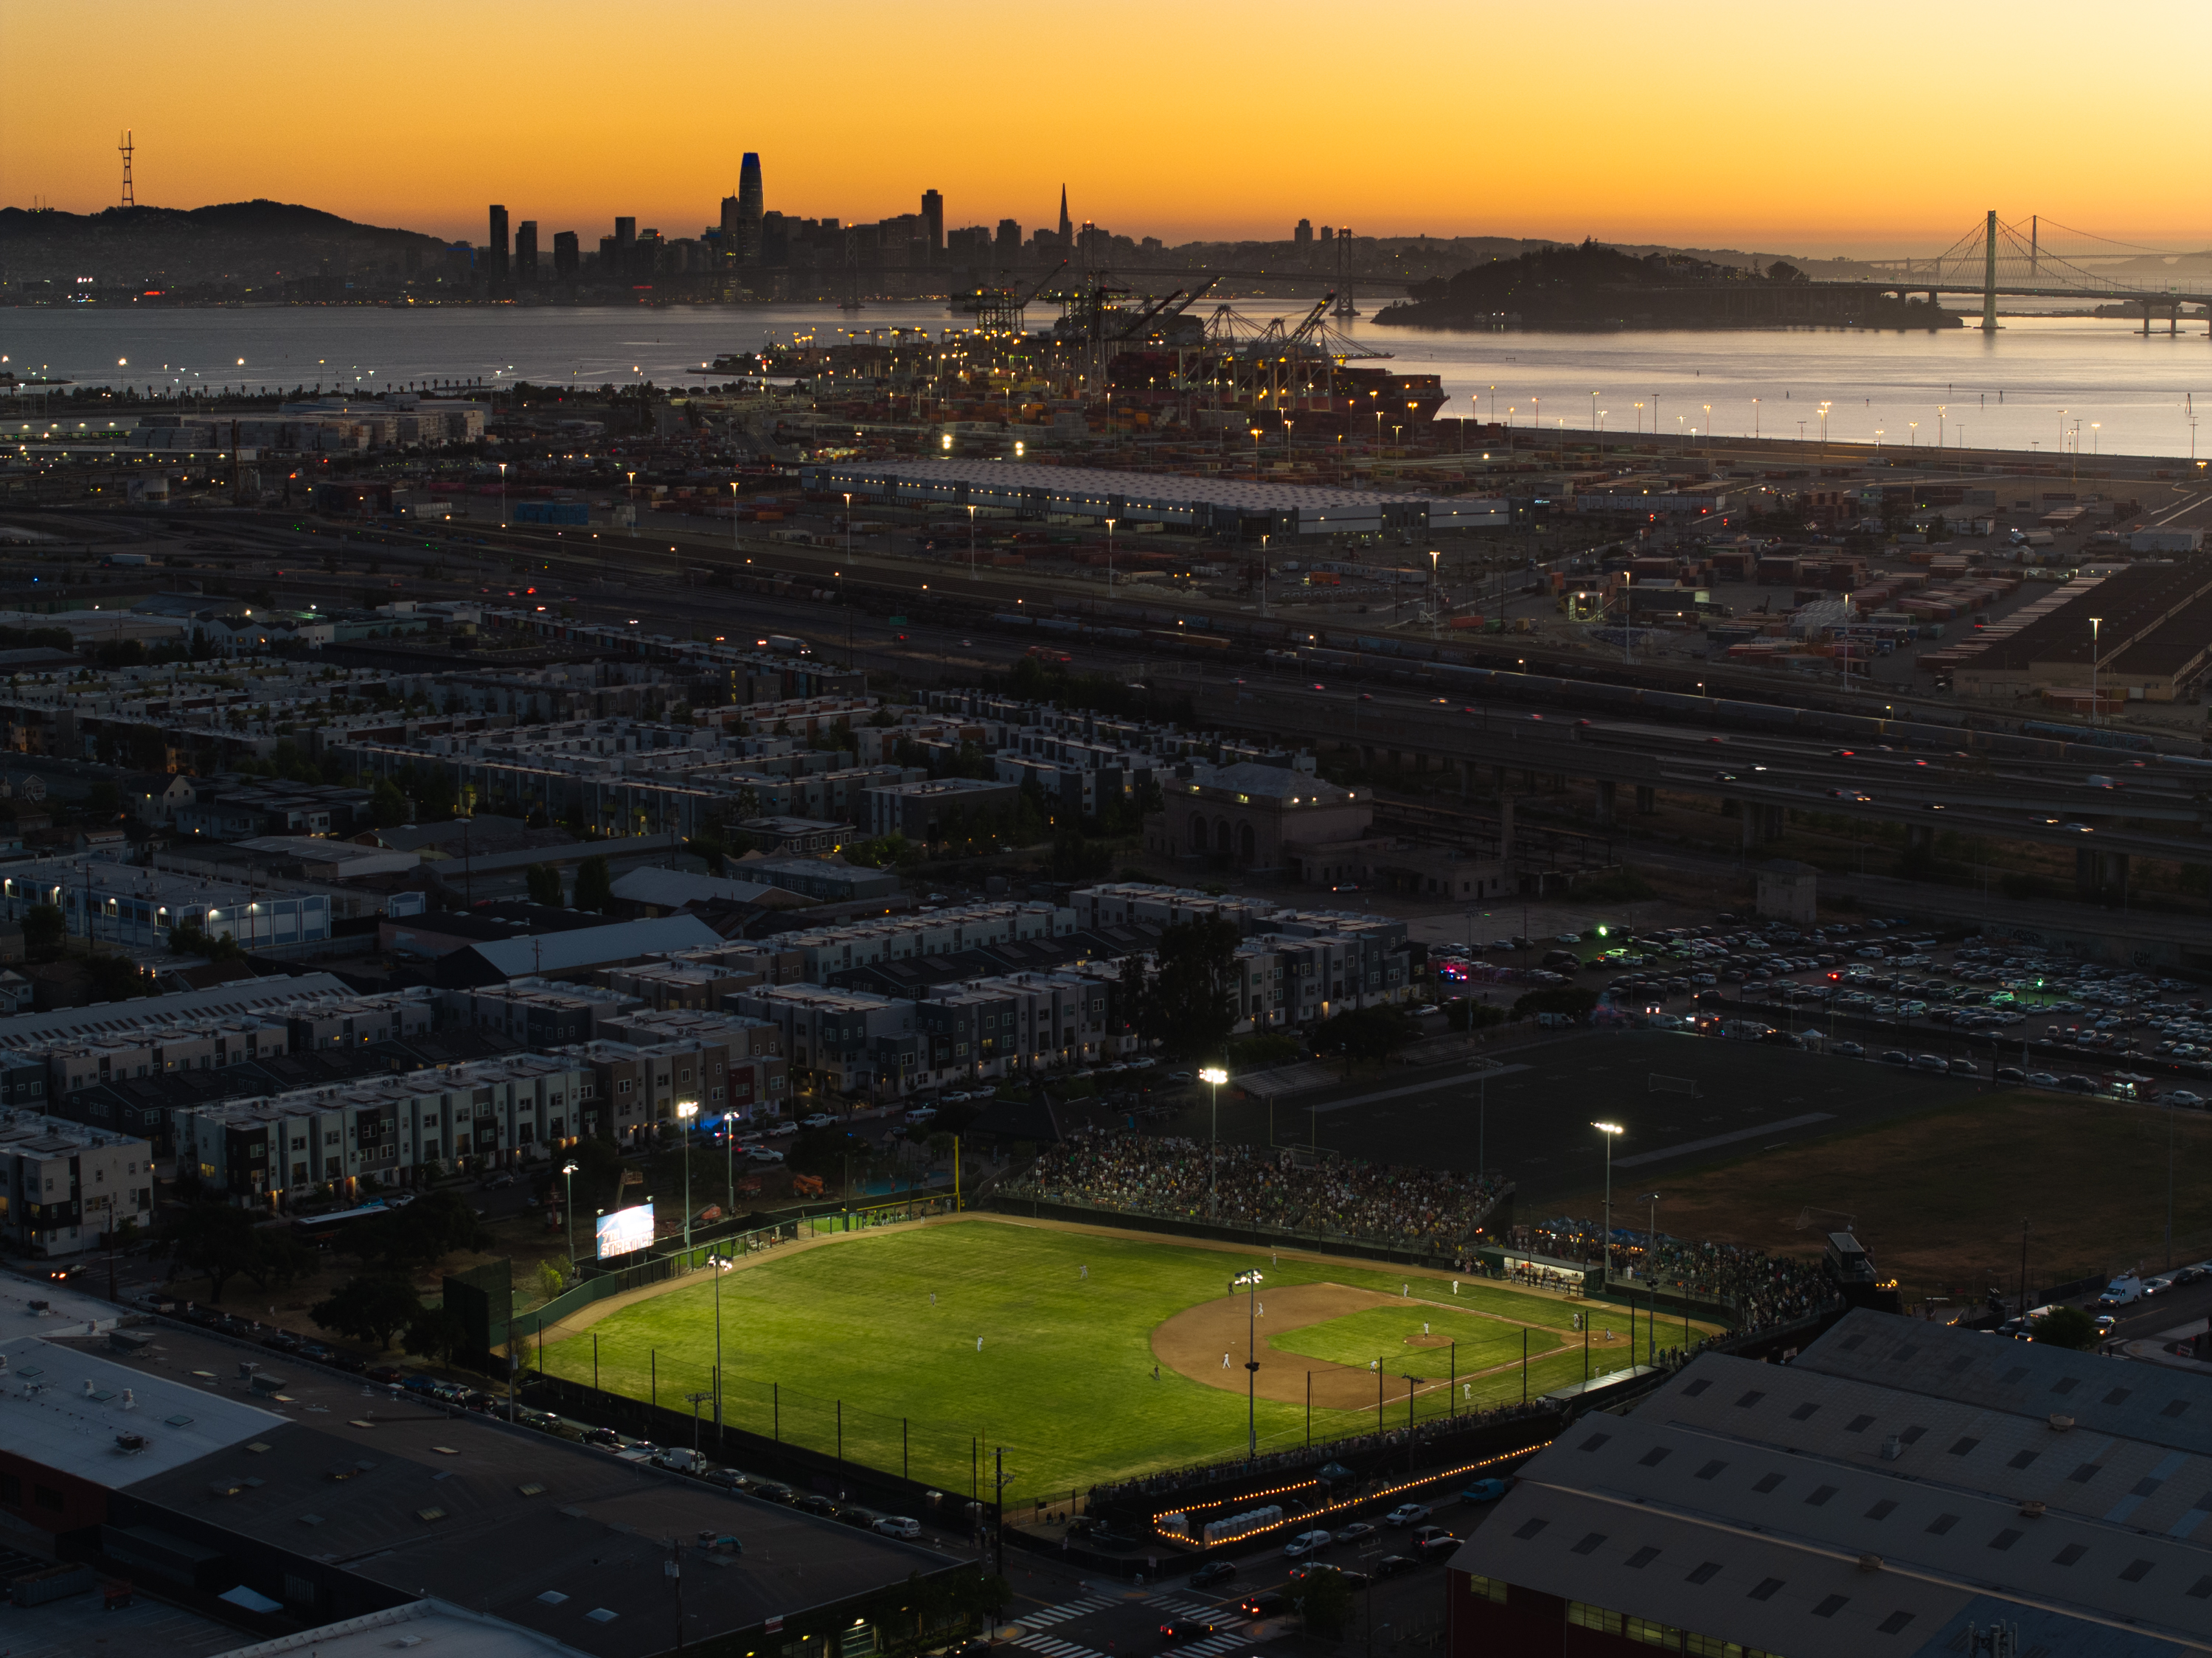 The image shows a baseball field lit up for a night game, surrounded by a cityscape, with a sunset over a water body and distant bridge and city skyline.